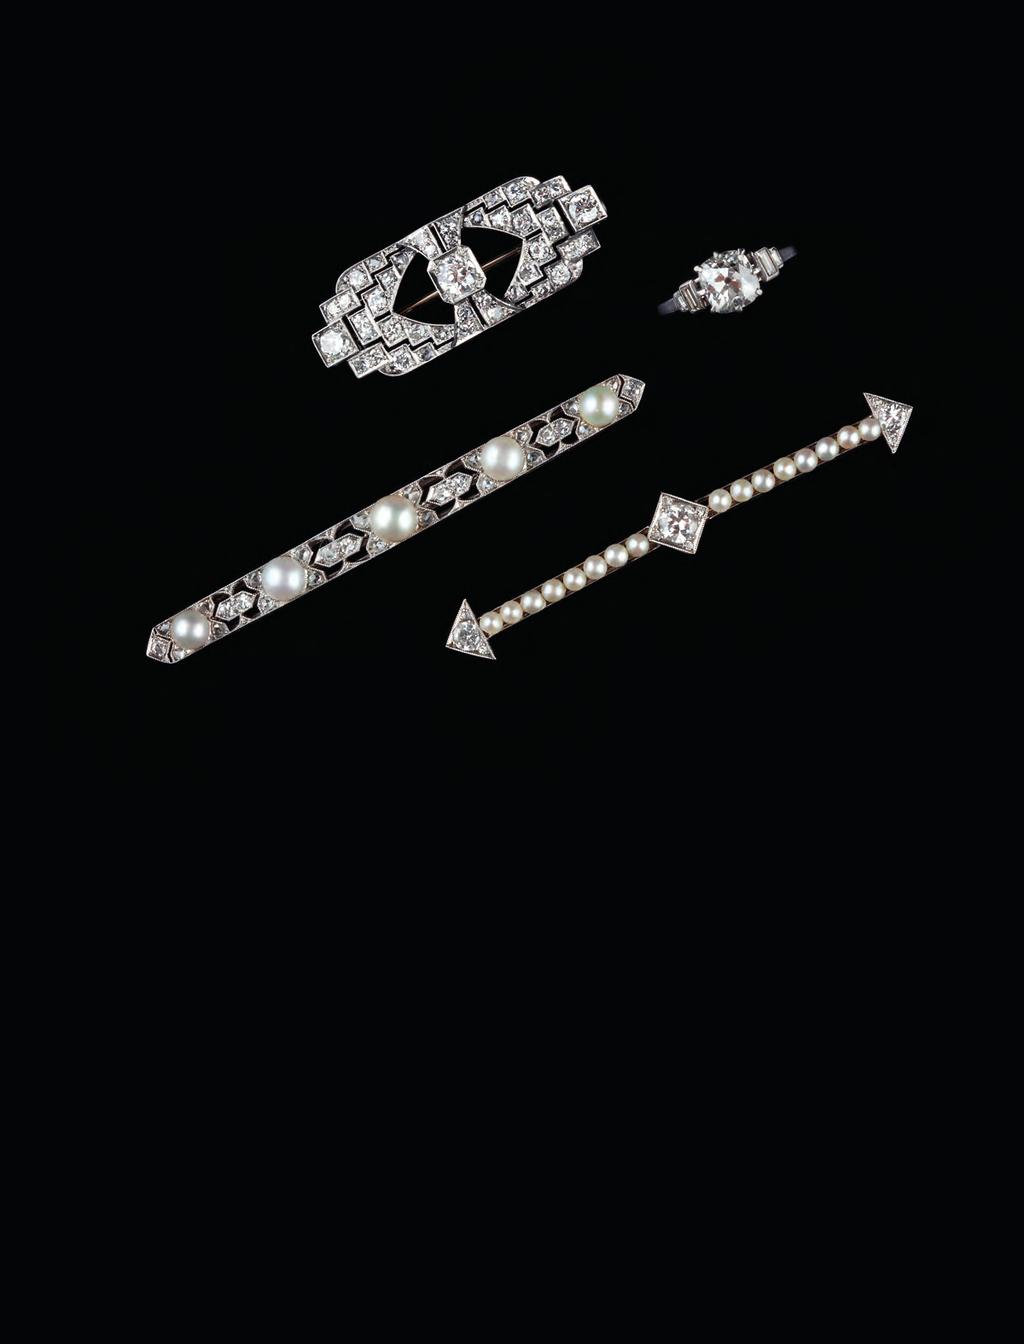 264. AN EARLY 20TH CENTURY HALF PEARL AND DIAMOND BAR BROOCH, the slightly tapered bar of pierced geometric design, millegrain set with single and rose-cut diamonds, spaced by five bouton half